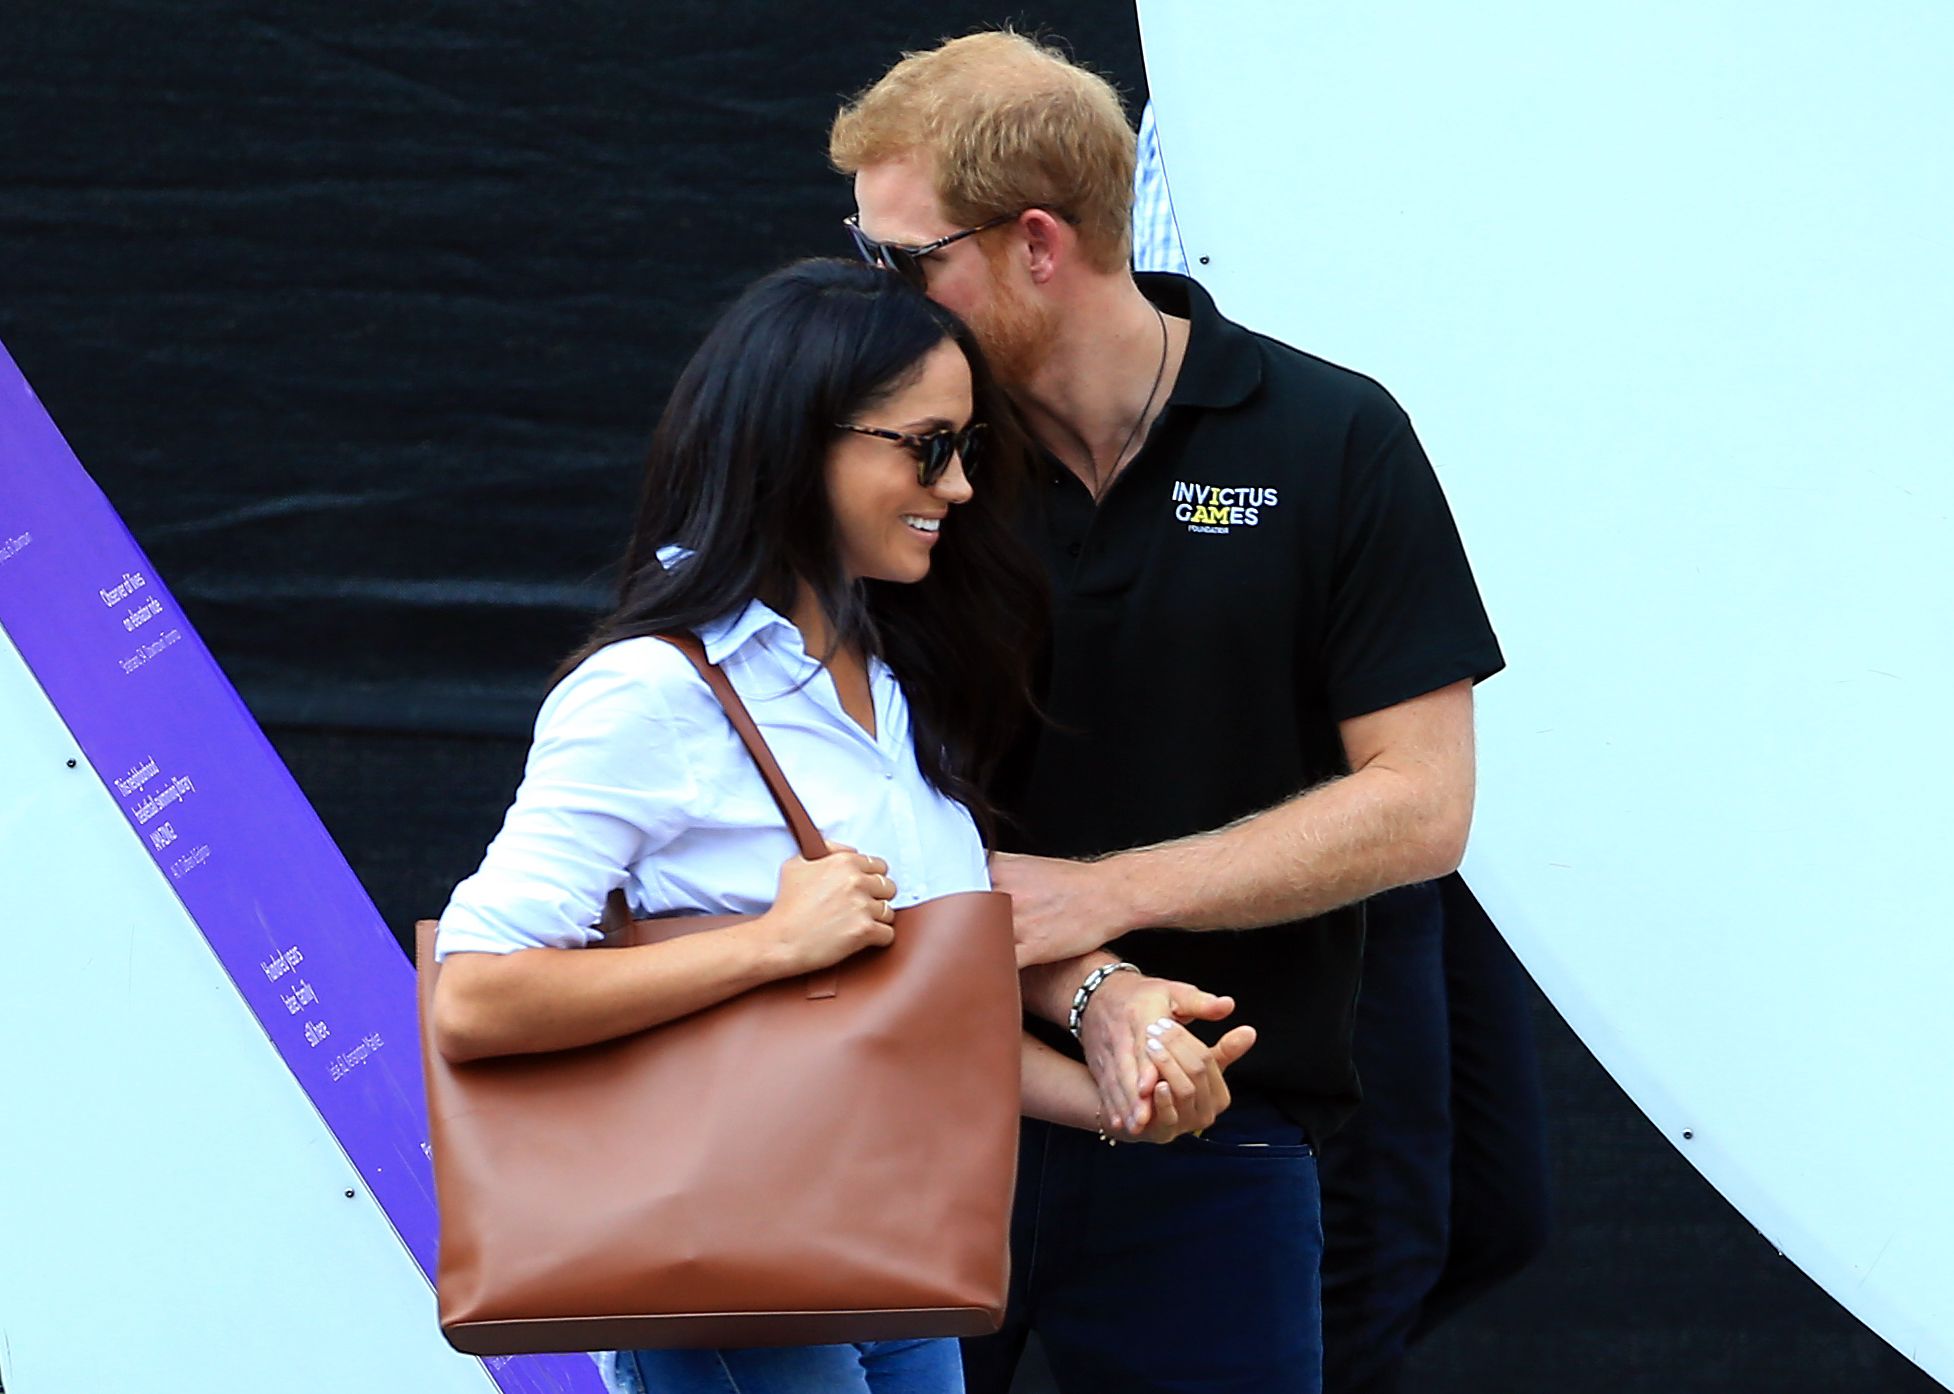 https://hips.hearstapps.com/hmg-prod.s3.amazonaws.com/images/hbz-prince-harry-meghan-markle-cute-moments-gettyimages-853713612-1523378904.jpg?crop=1xw:1xh;center,top